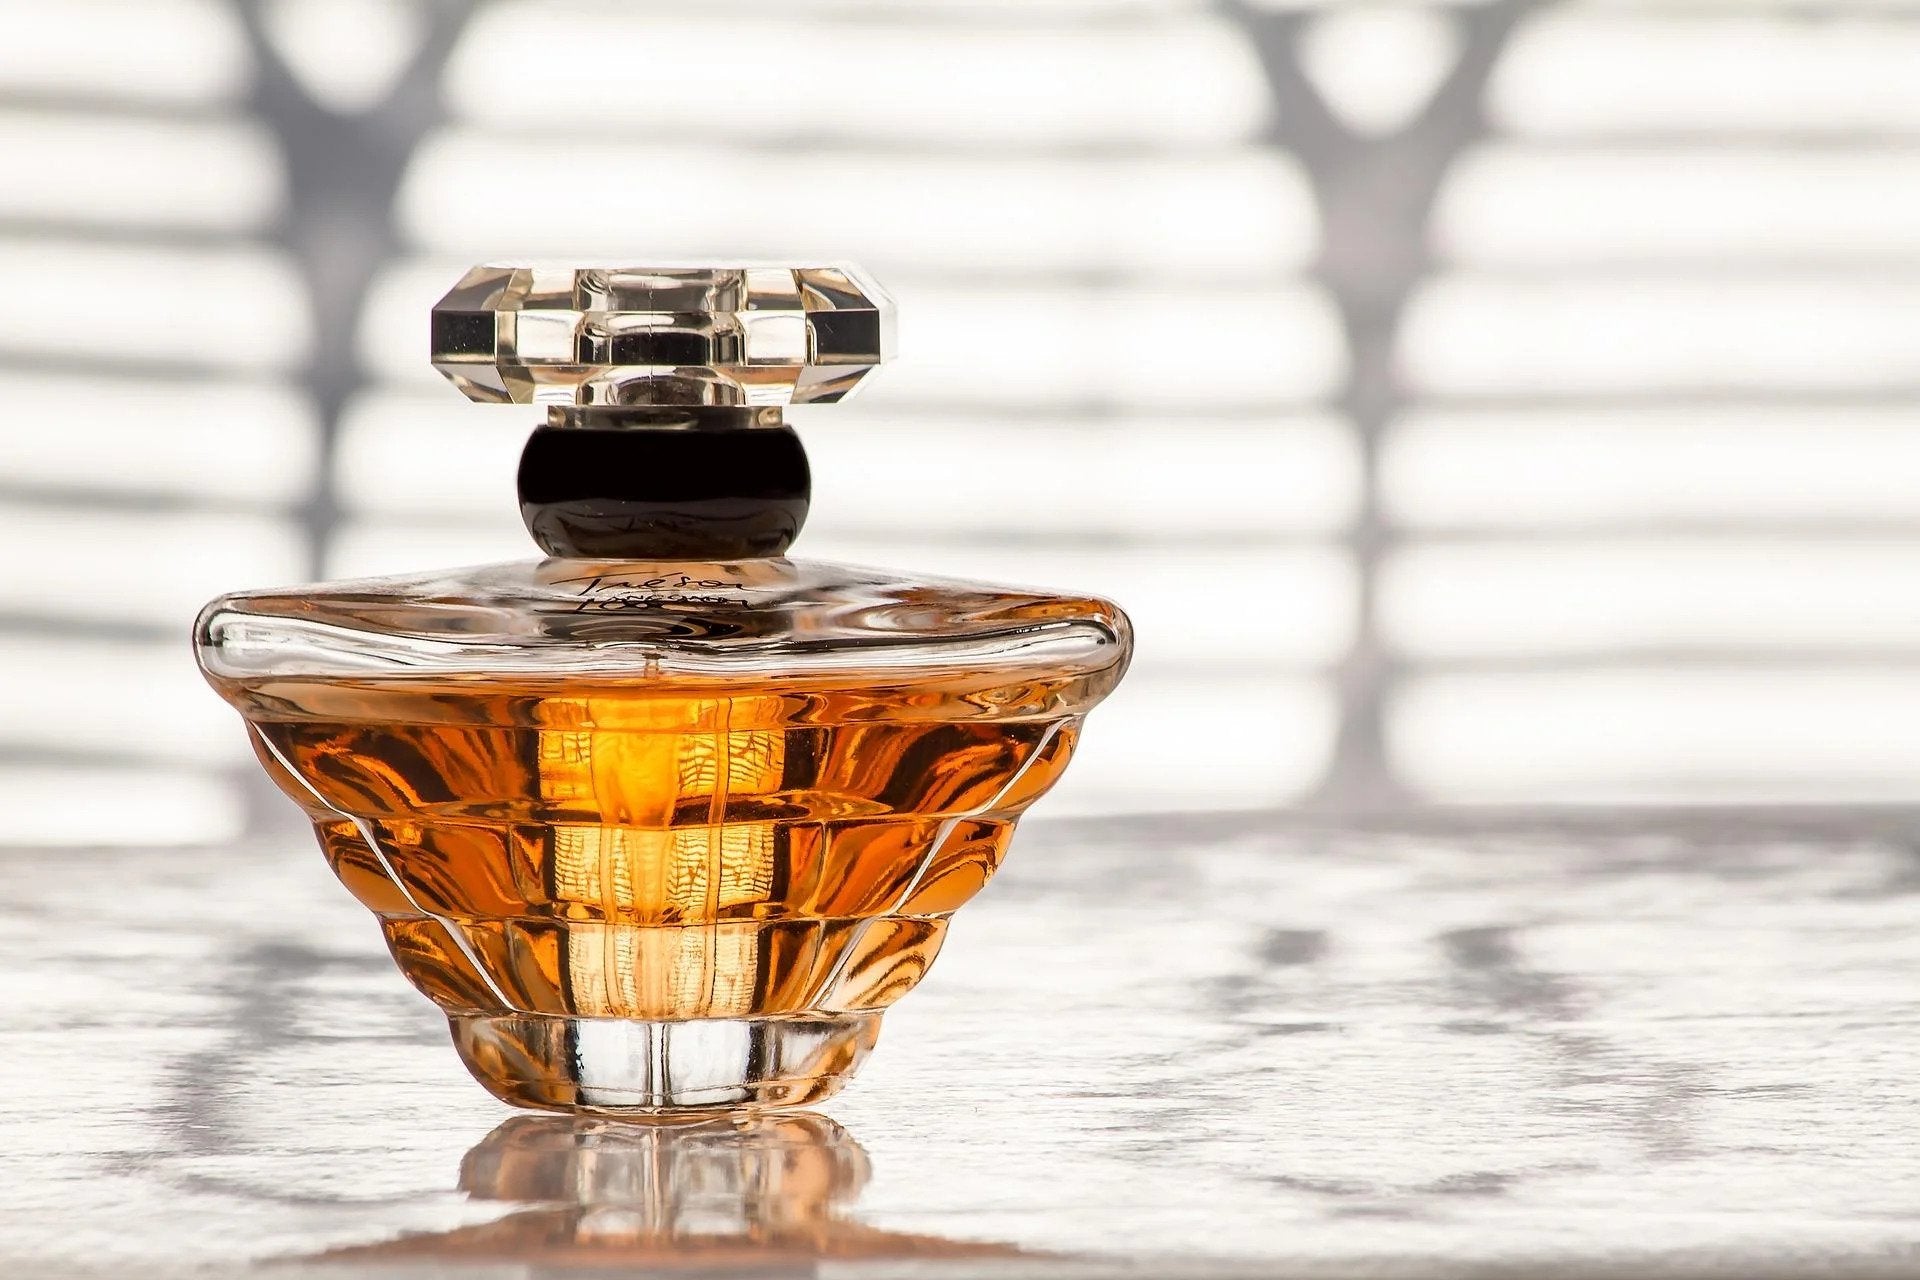 WHAT DOES YOUR PERFUME SAY ABOUT YOU?